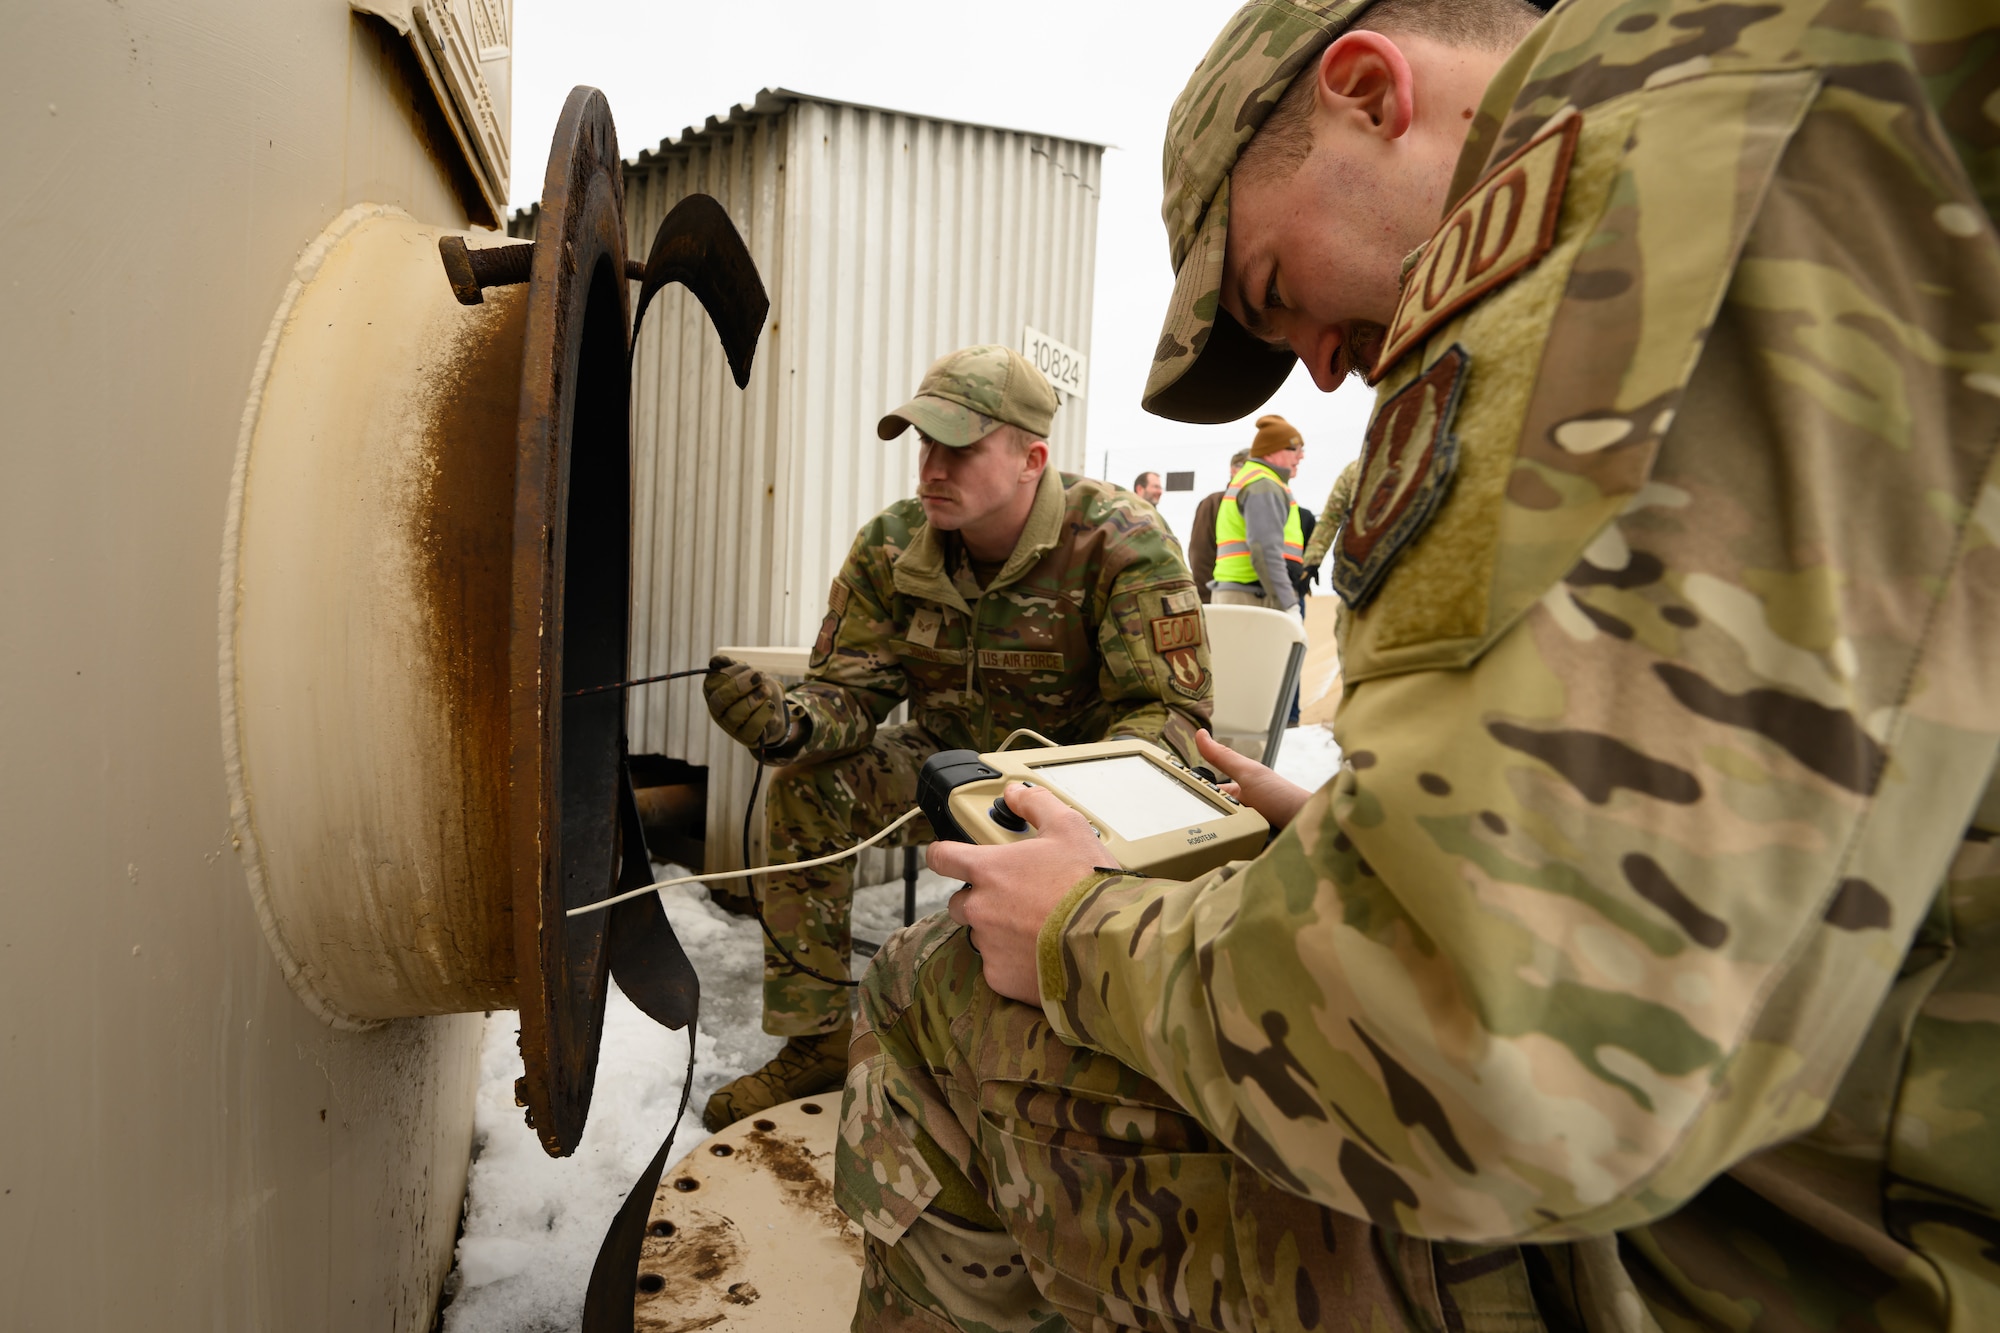 An airman looks at a video monitor that is sending images from inside a fuel tank